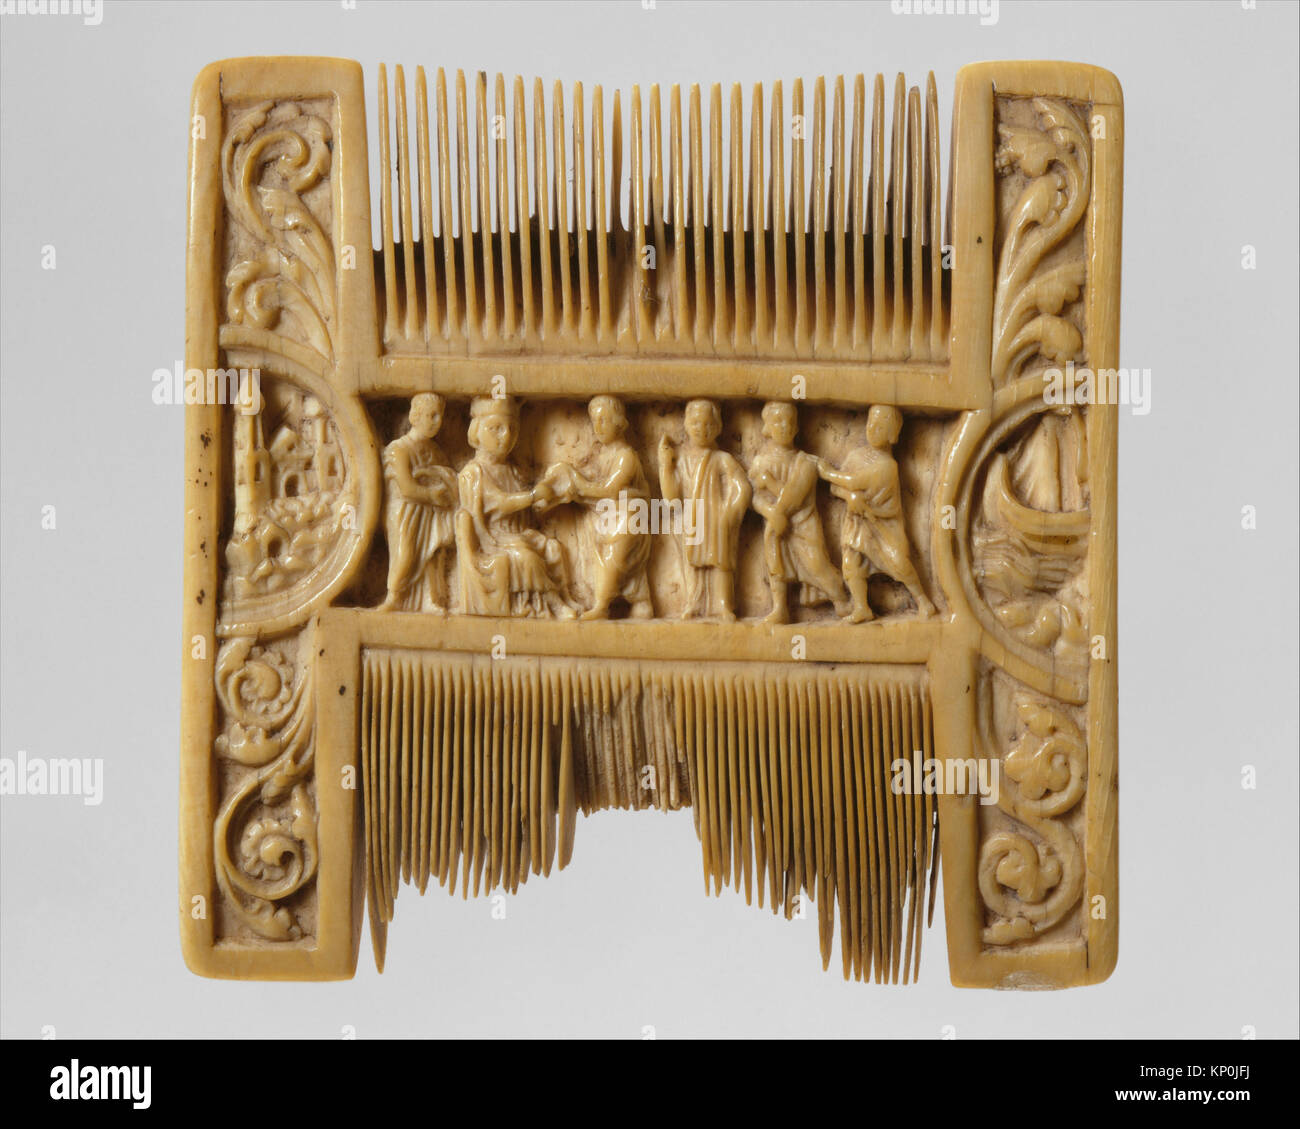 Double-Sided Ivory Liturgical Comb with Scenes of Henry II and Thomas Becket MET DT5978 466161 British, Double-Sided Ivory Liturgical Comb with Scenes of Henry II and Thomas Becket, ca. 1200?1210, Ivory, Overall: 3 3/8 x 3 3/8 x 1/2 in. (8.6 x 8.6 x 1.2 cm). The Metropolitan Museum of Art, New York. Purchase, Rogers Fund, and Schimmel Foundation Inc., Mrs. Maxime L. Hermanos, Lila Acheson Wallace, Nathaniel Spear Jr., Mrs. Katherine S. Rorimer, William Kelly Simpson, Alastair B. Martin and Anonymous Gifts, 1988 (1988.279) Stock Photo